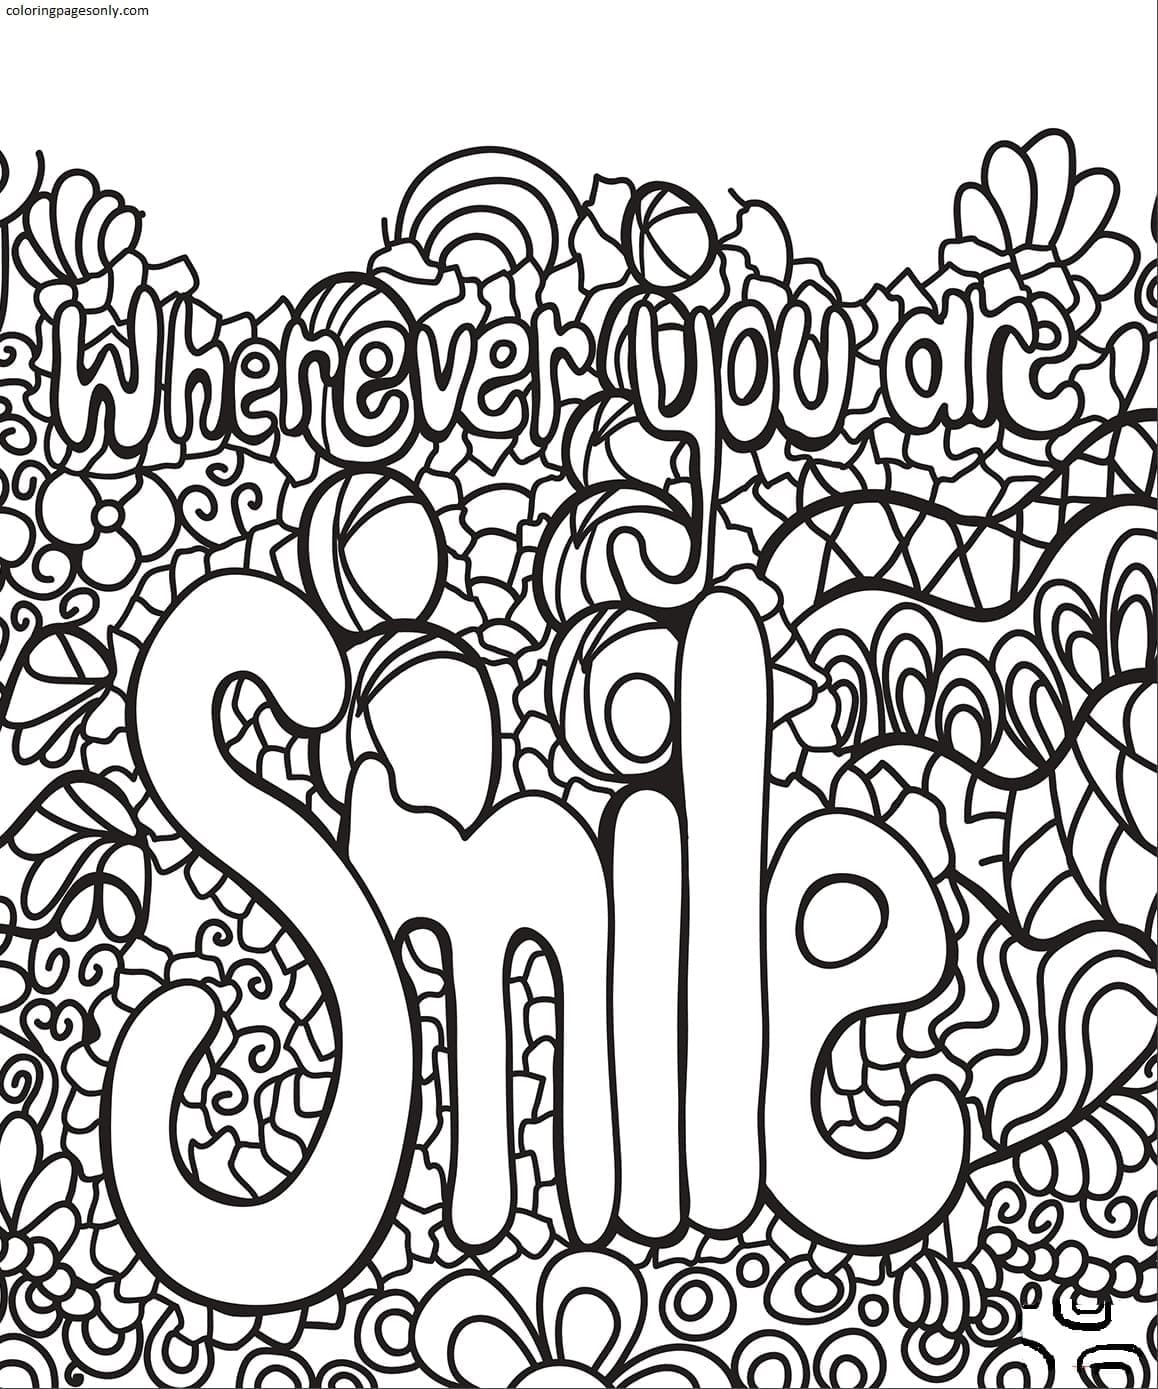 Wherever You are Smile Coloring Pages - Teenage Coloring Pages - Coloring  Pages For Kids And Adults